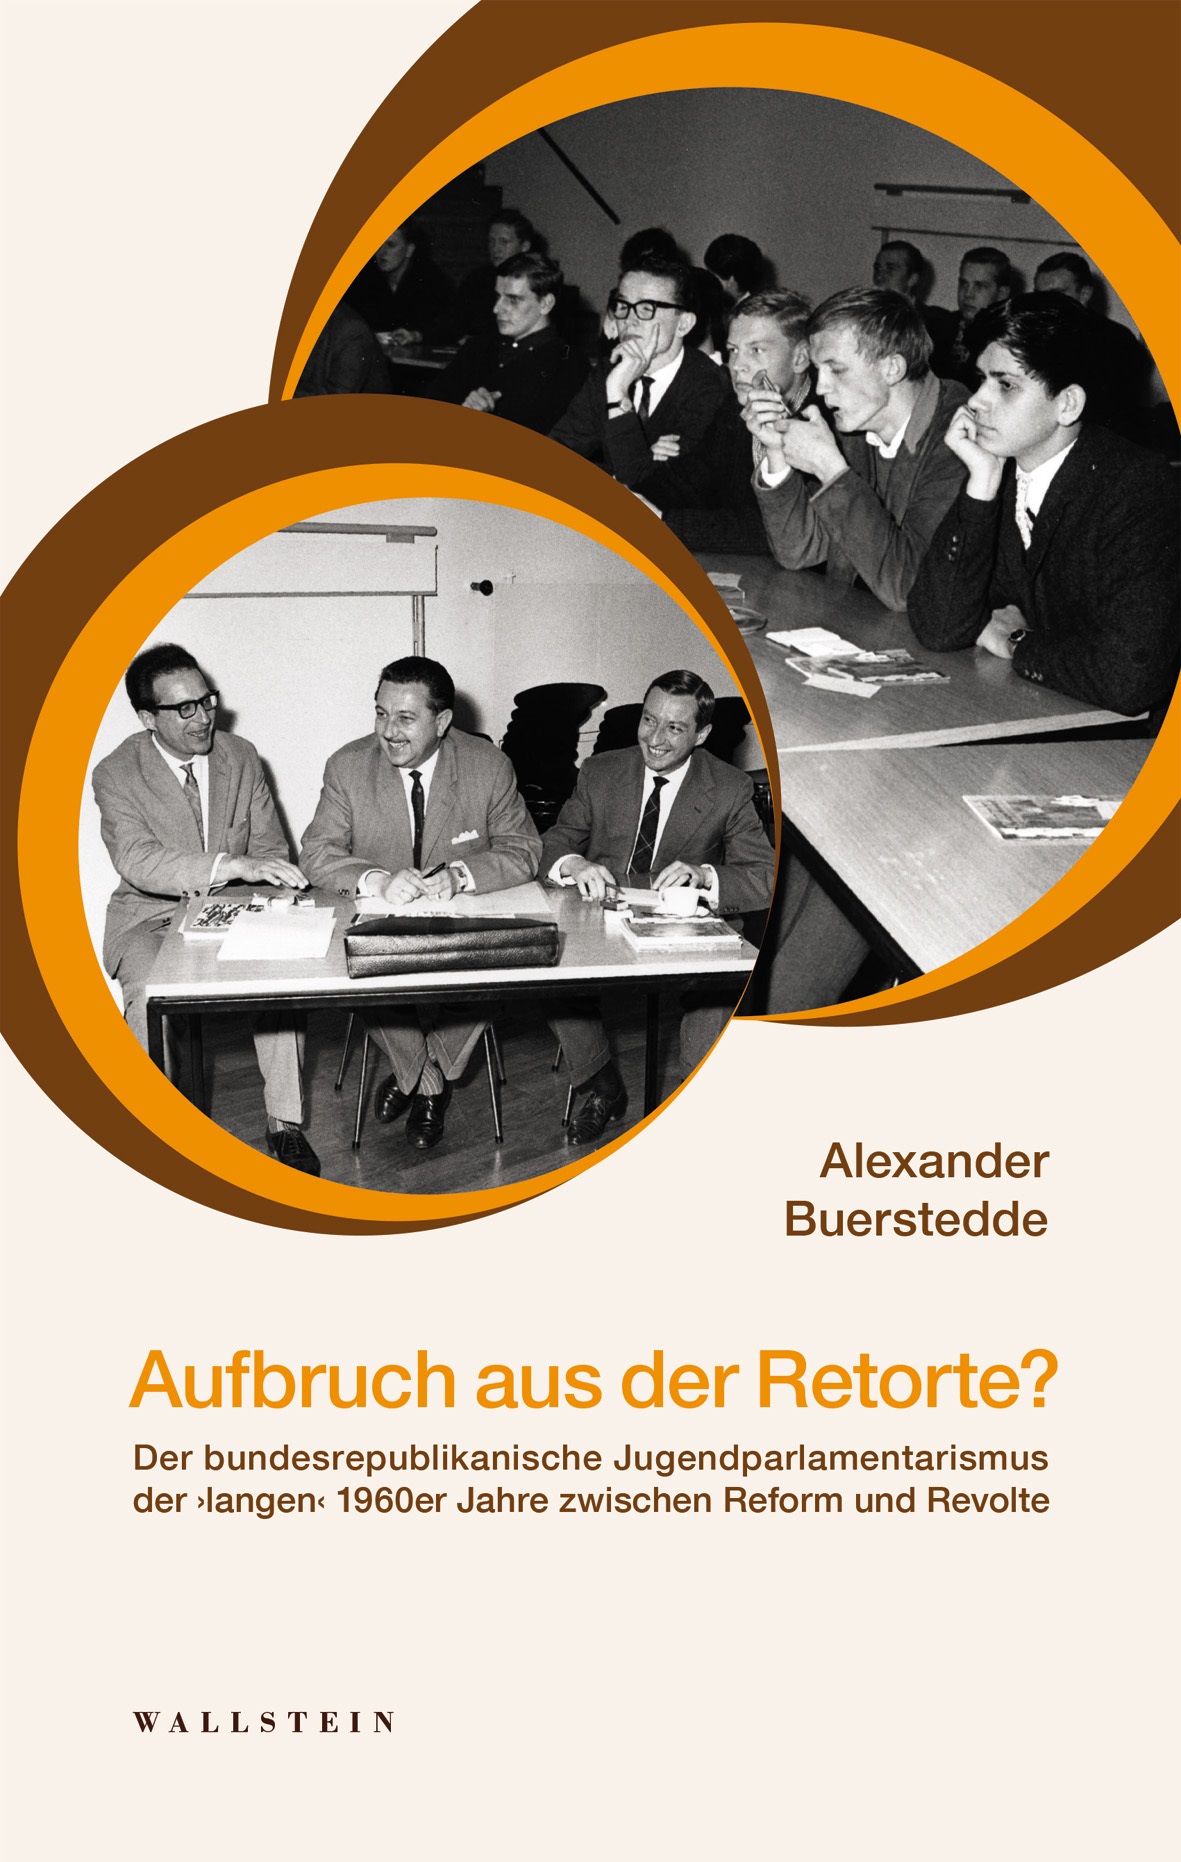 Title page of the book "Aufbruch aus der Retorte? Federal Republican youth parliamentarianism of the 'long' 1960s between reform and revolt"